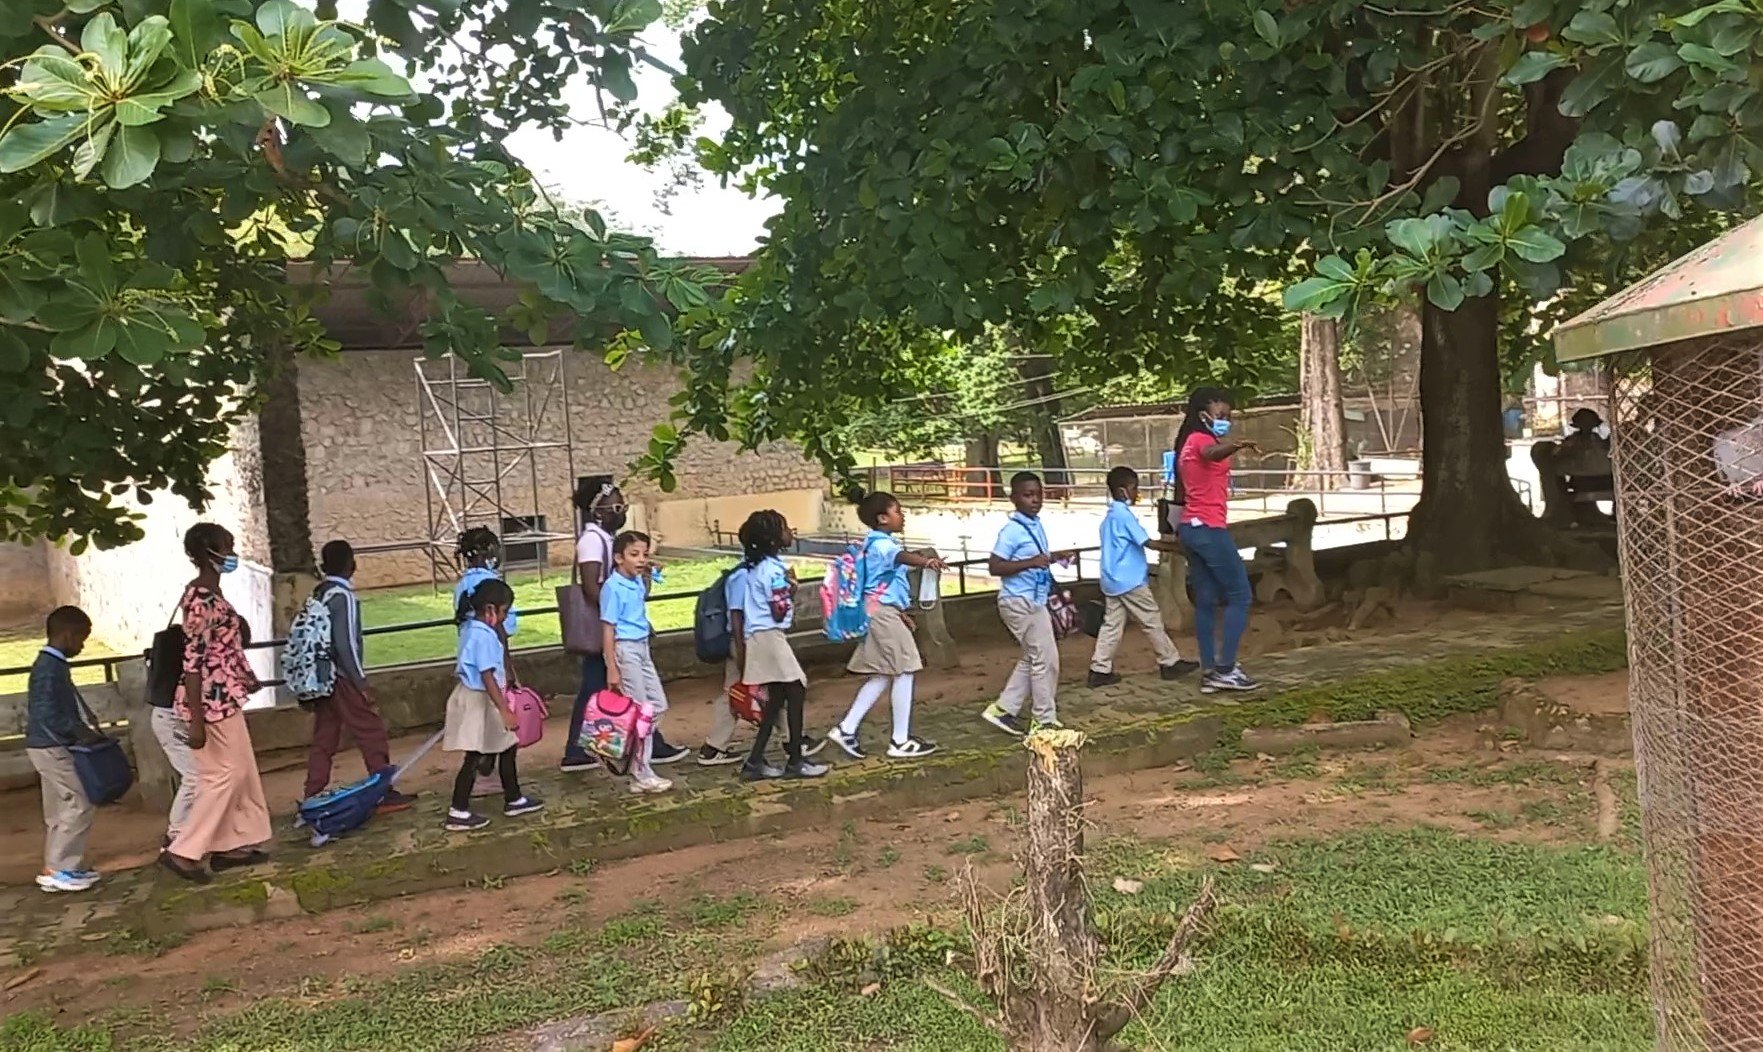  2nd graders took a WILD trip to the Zoological Gardens at the University of Ibadan! 